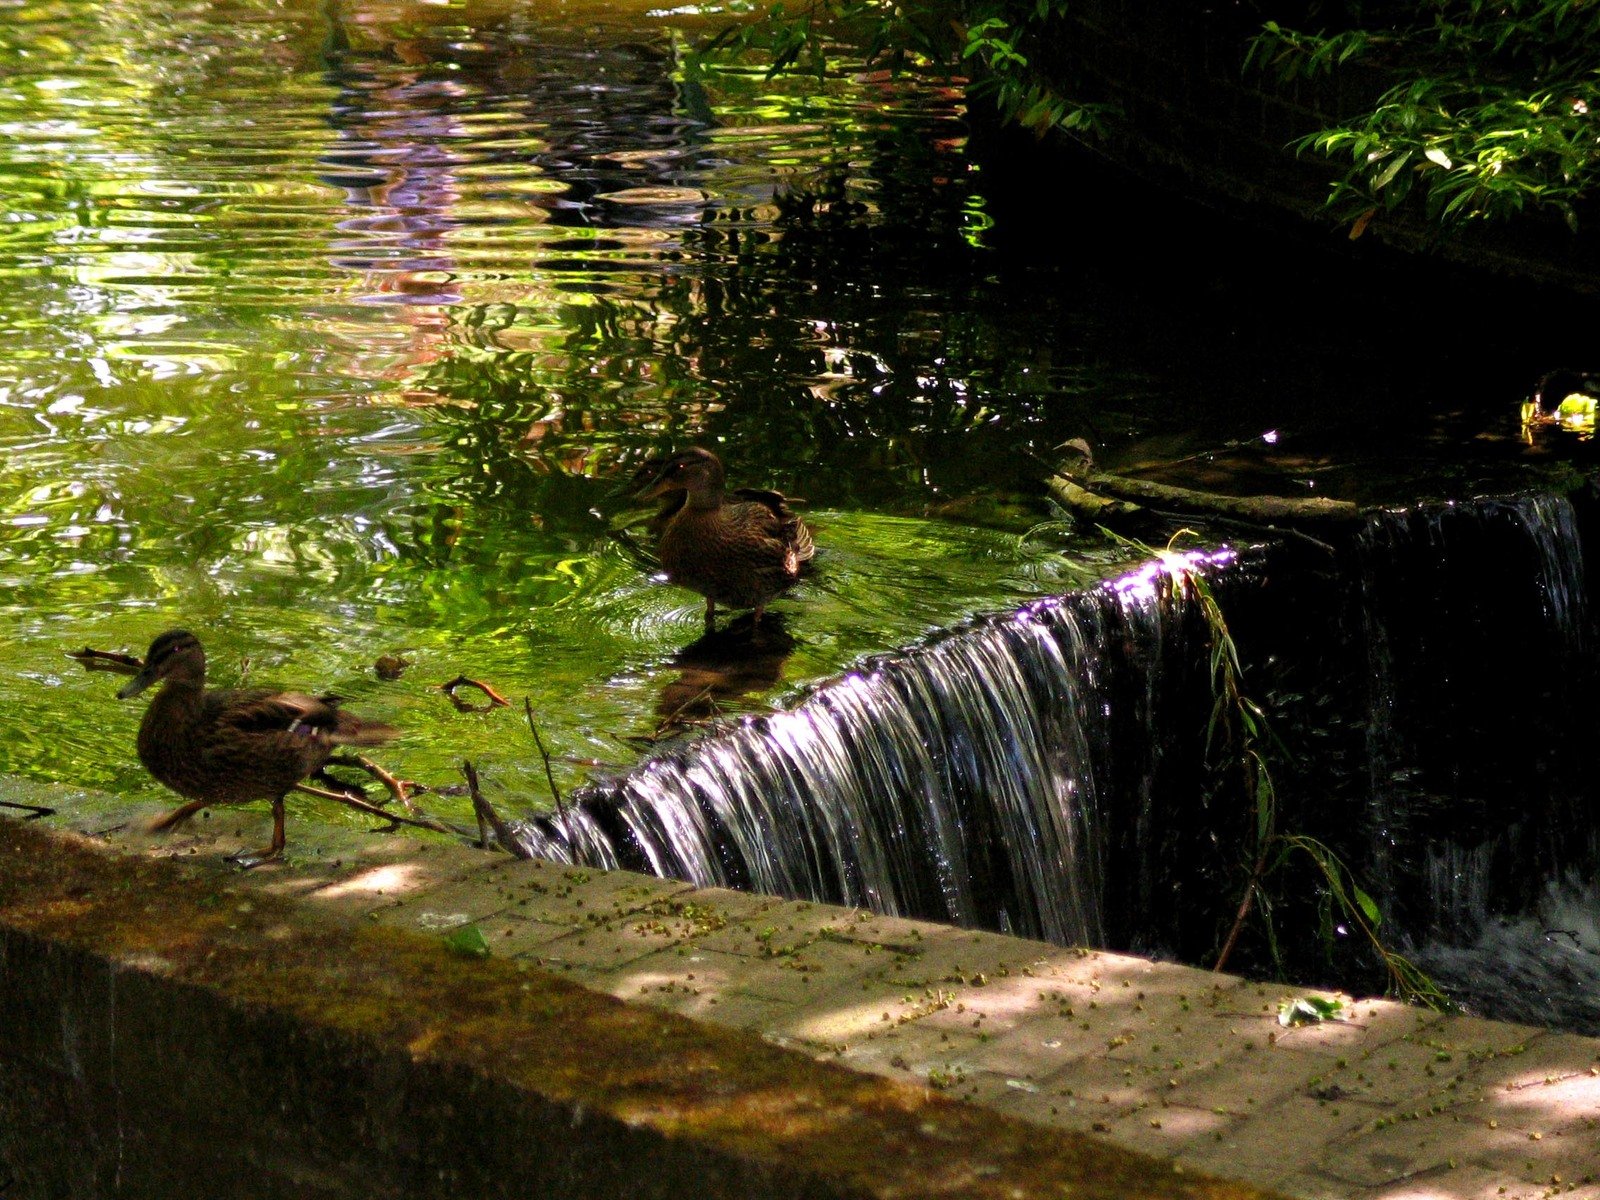 two ducks swimming in the water near a waterfall